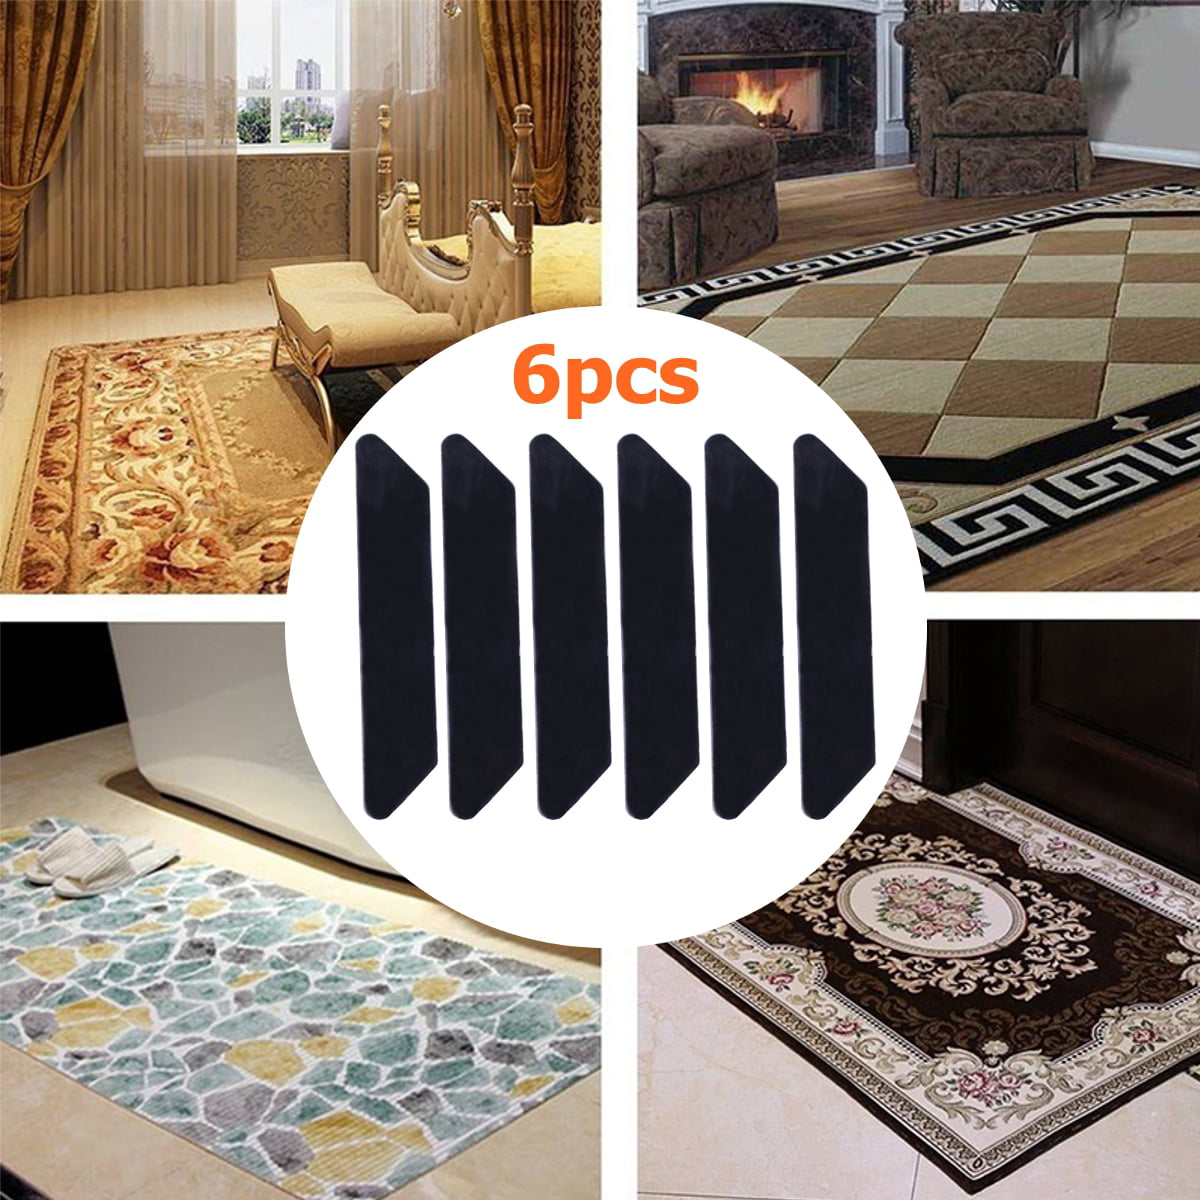 Rug Grippers Pad 6pcs Renewable, How To Keep A Rug In Place On Hardwood Floors